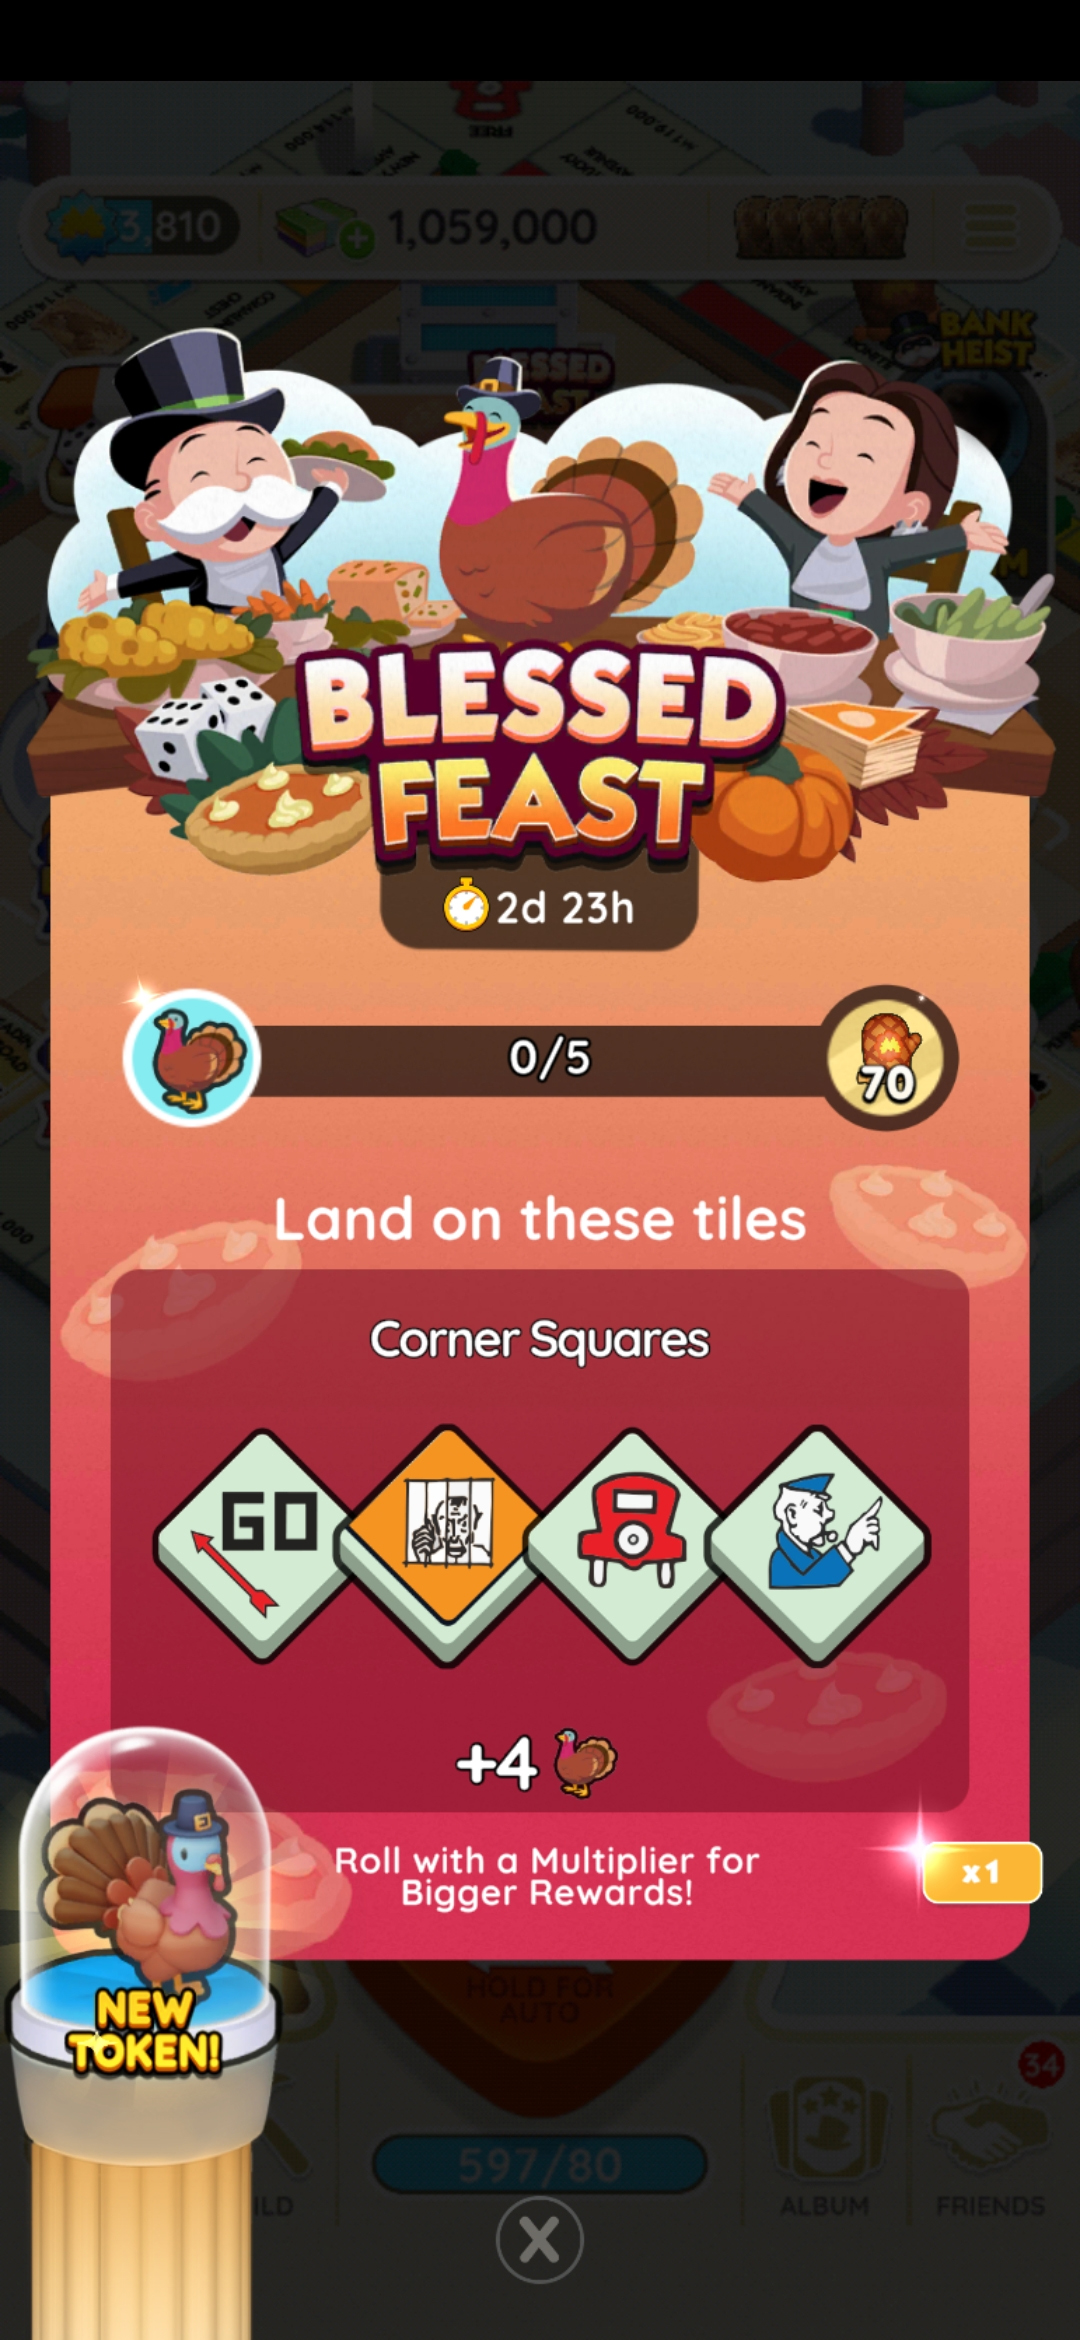 A full-sized image for the Blessed Feast event in Monopoly GO that shows Rich Uncle Pennybags on the left side of a table with a brunette on the right. There's a turkey in between them. The image is part of a list on all the rewards, milestones, and prizes you can get for the Blessed Feast event in Monopoly GO as well as how to play the event and win.